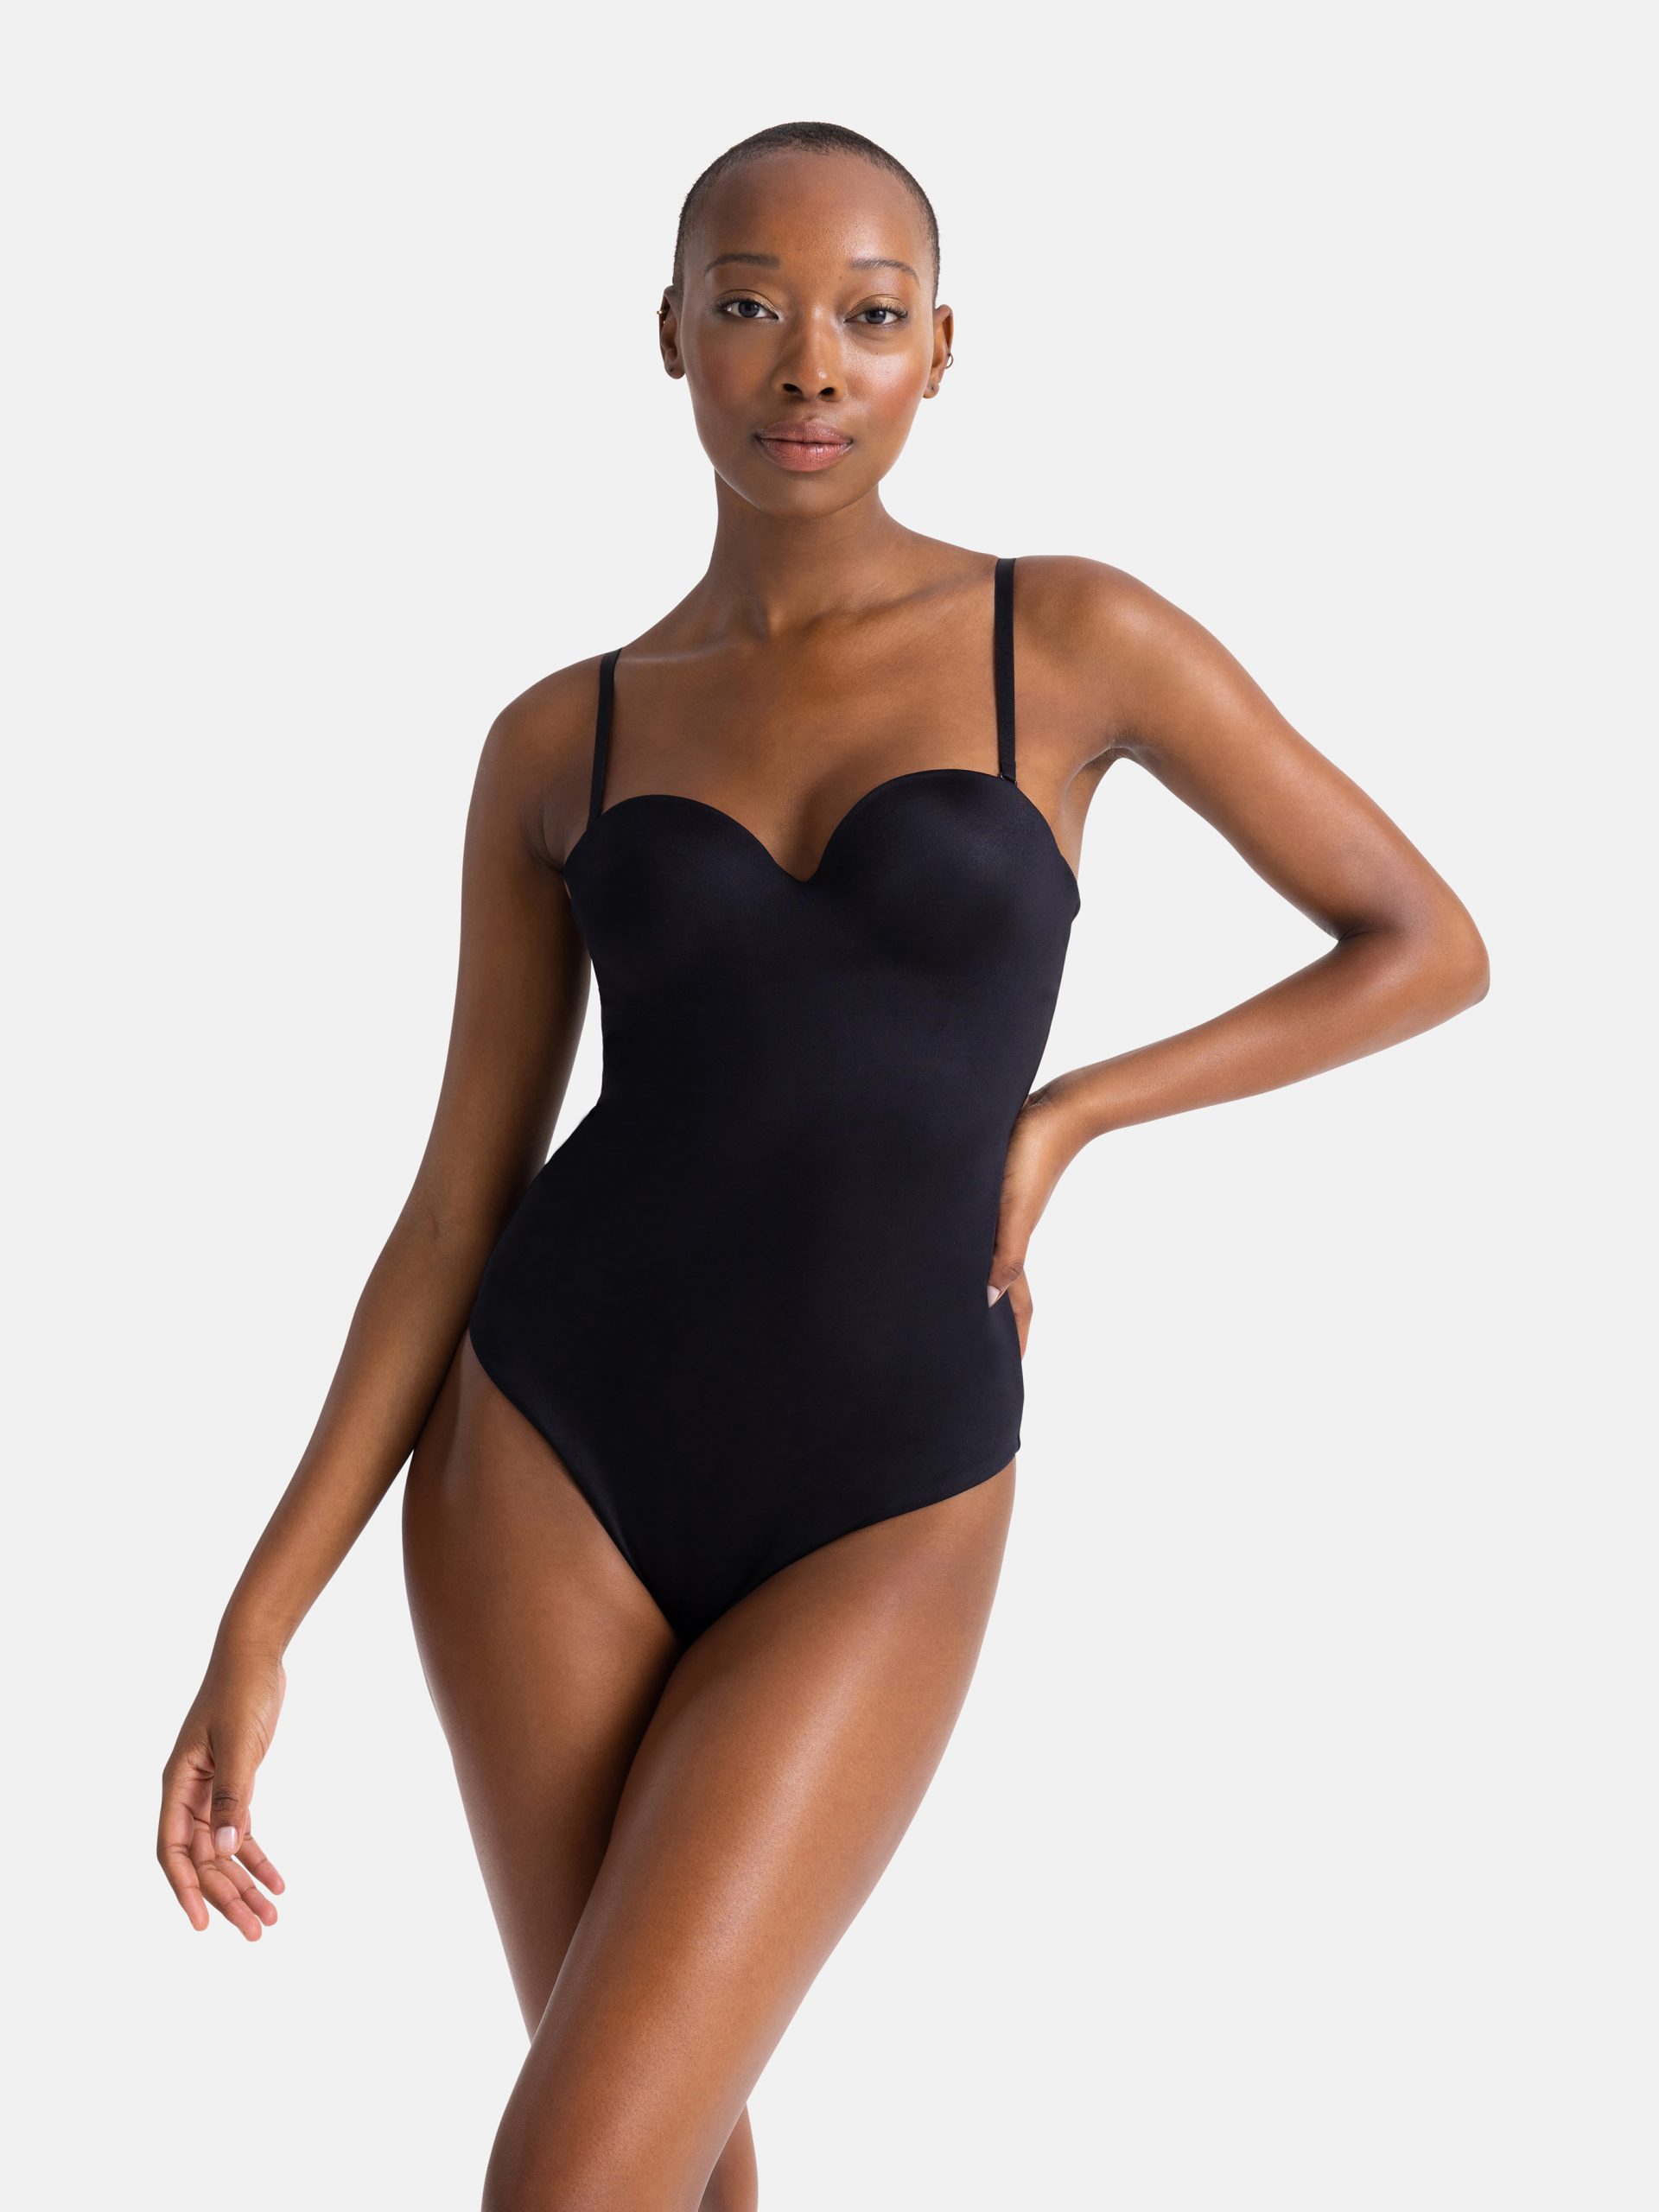 Wolford, Mat de Luxe Forming String Body